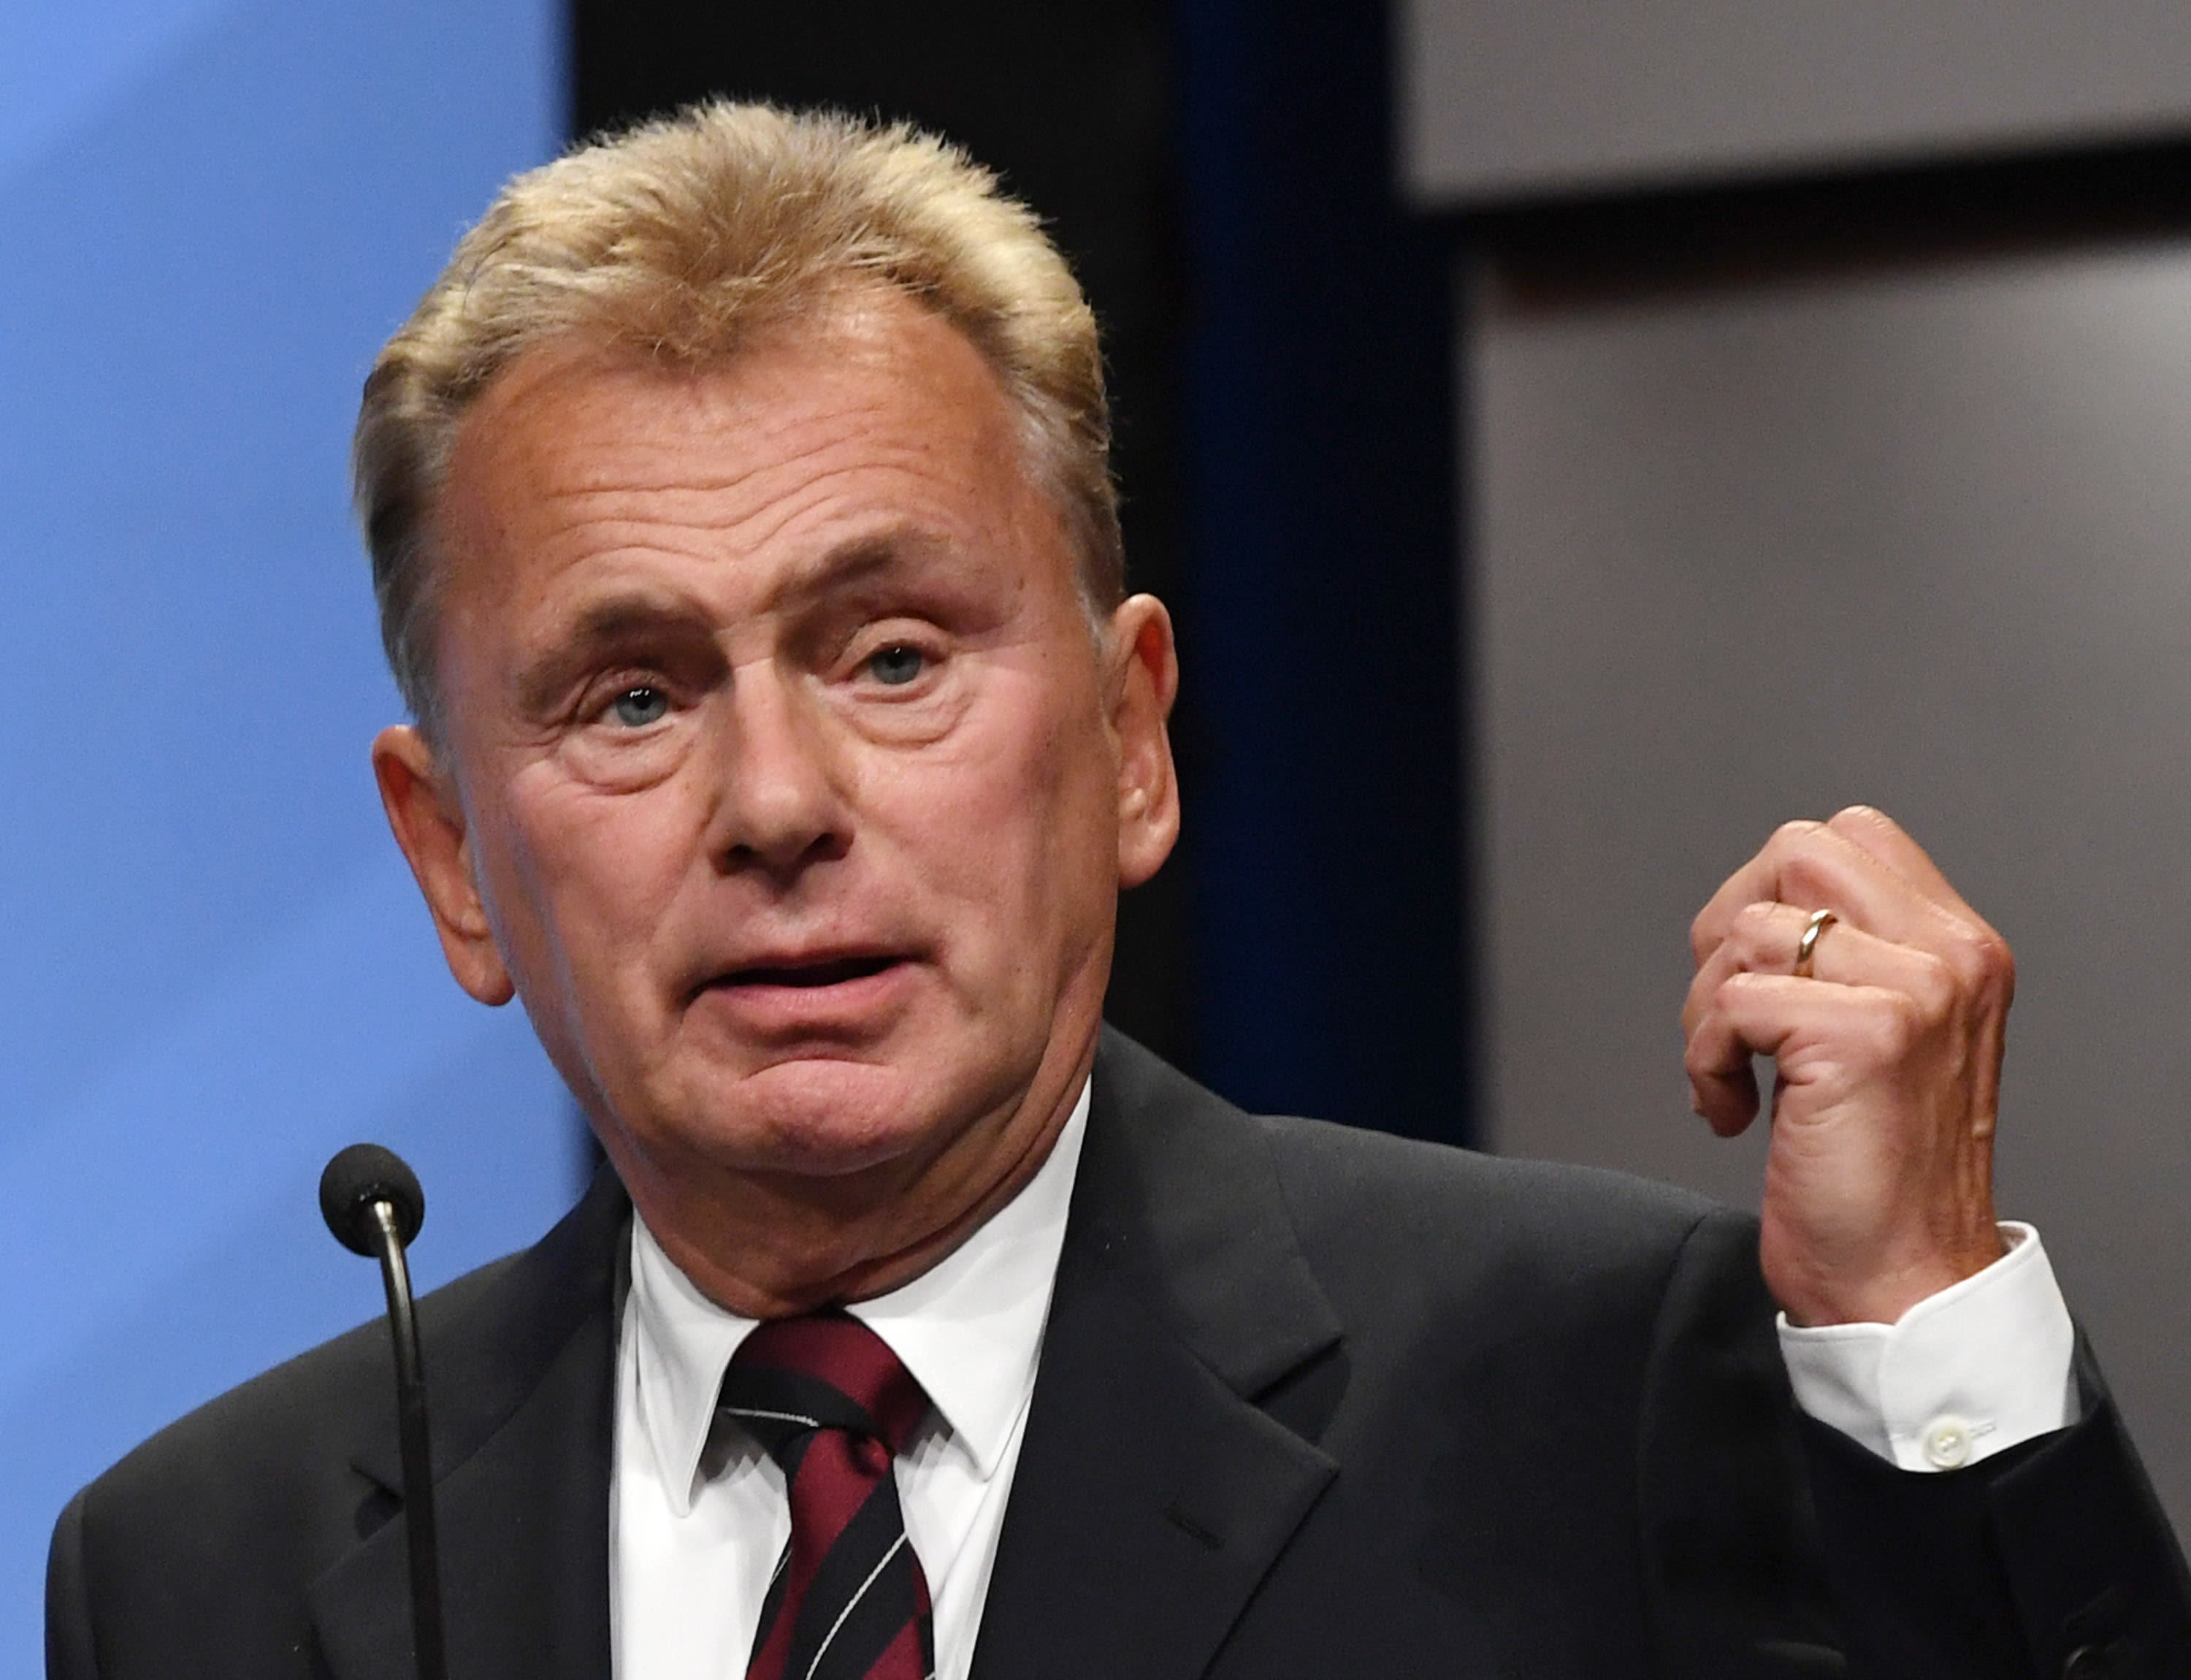 Pat Sajak doing community theater in Hawaii following ‘Wheel of Fortune’